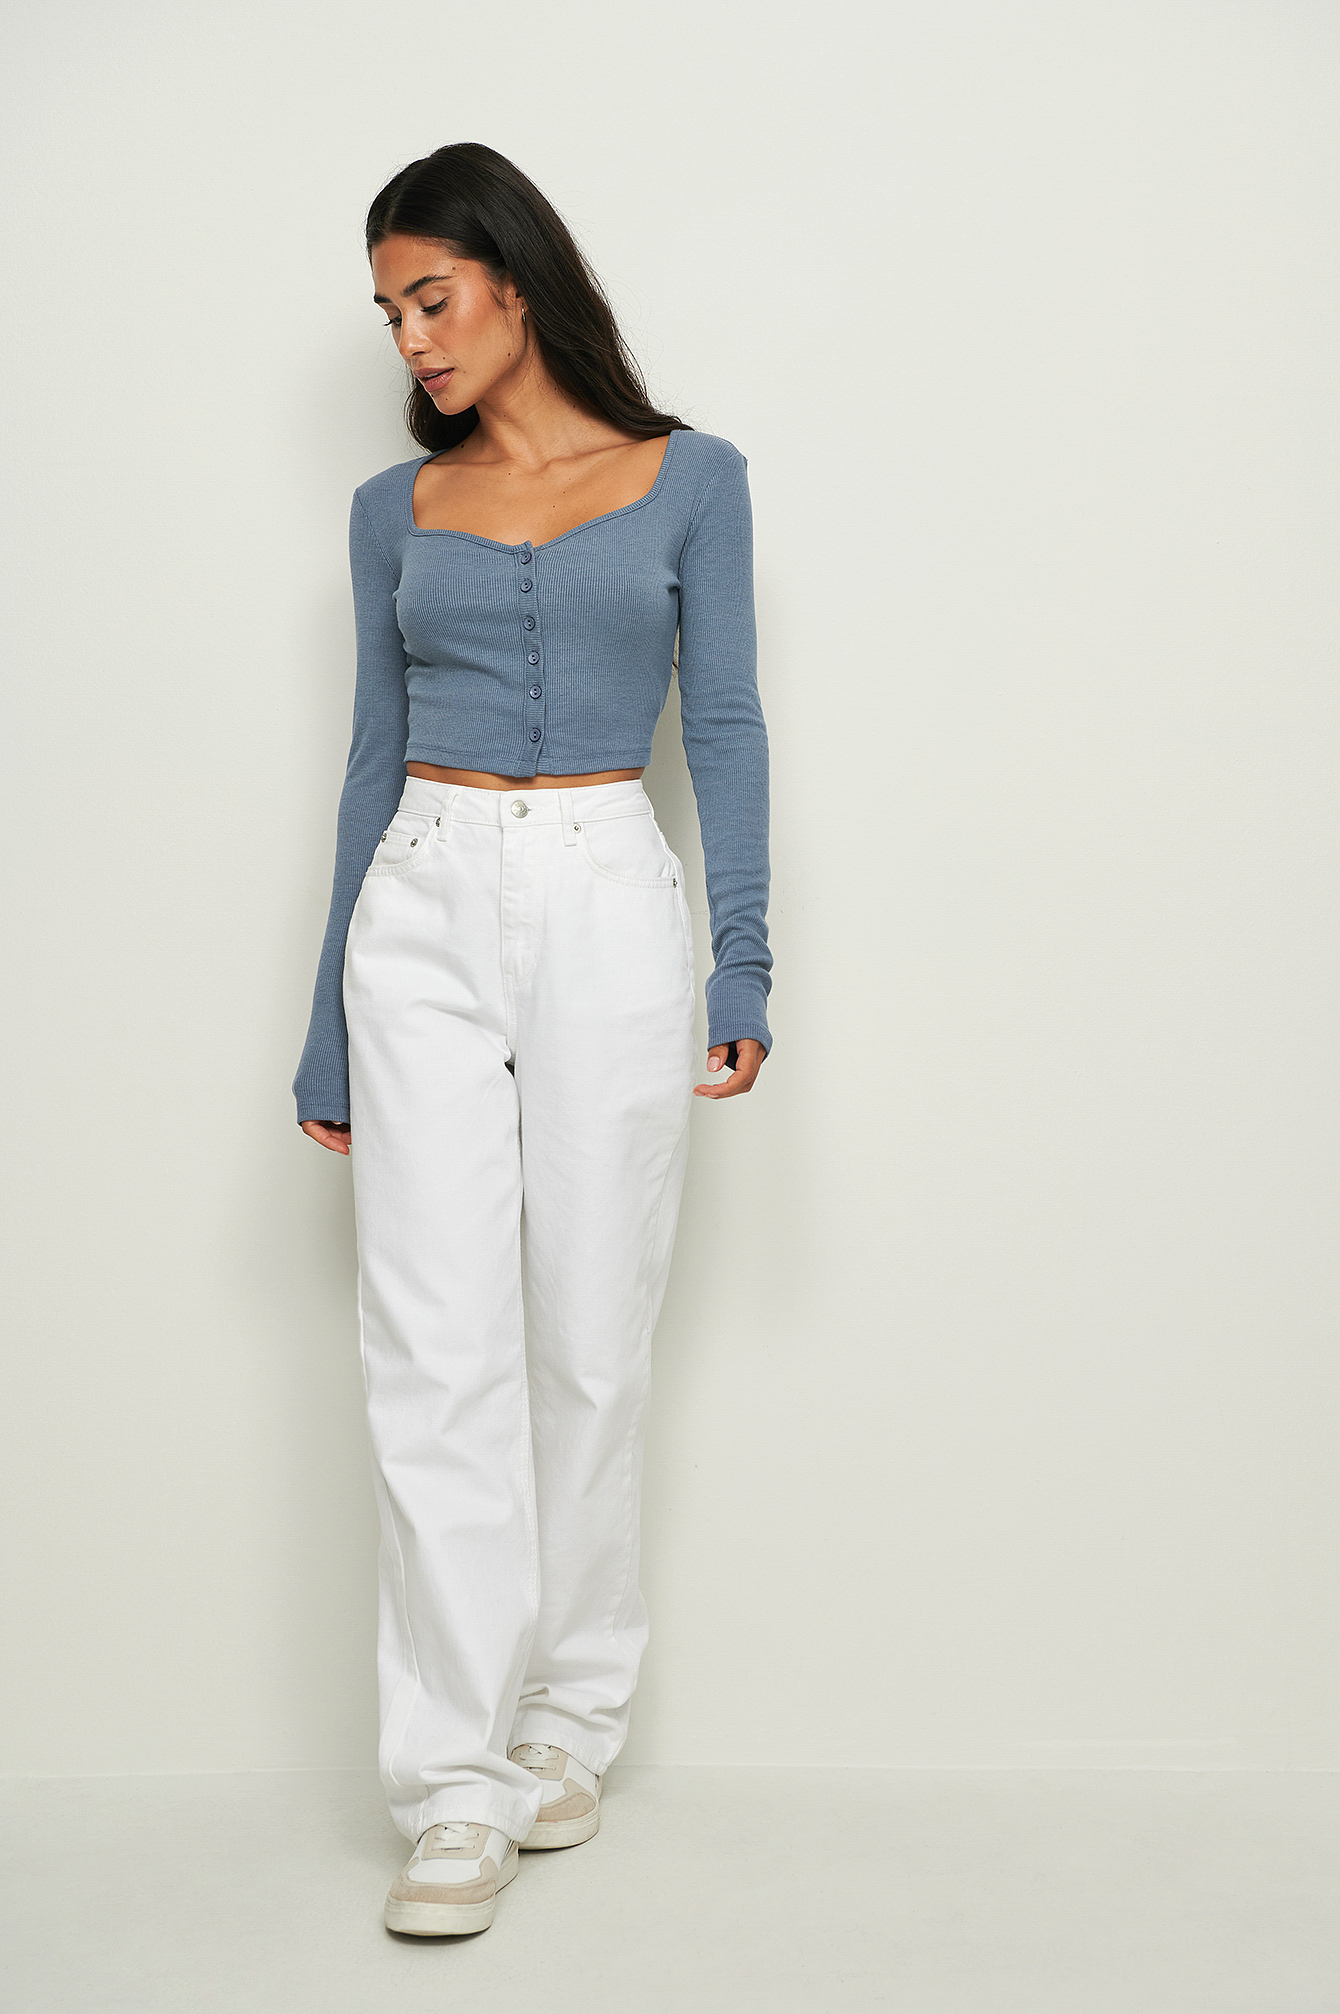 Heart Neckline Cropped Cardigan Outfit